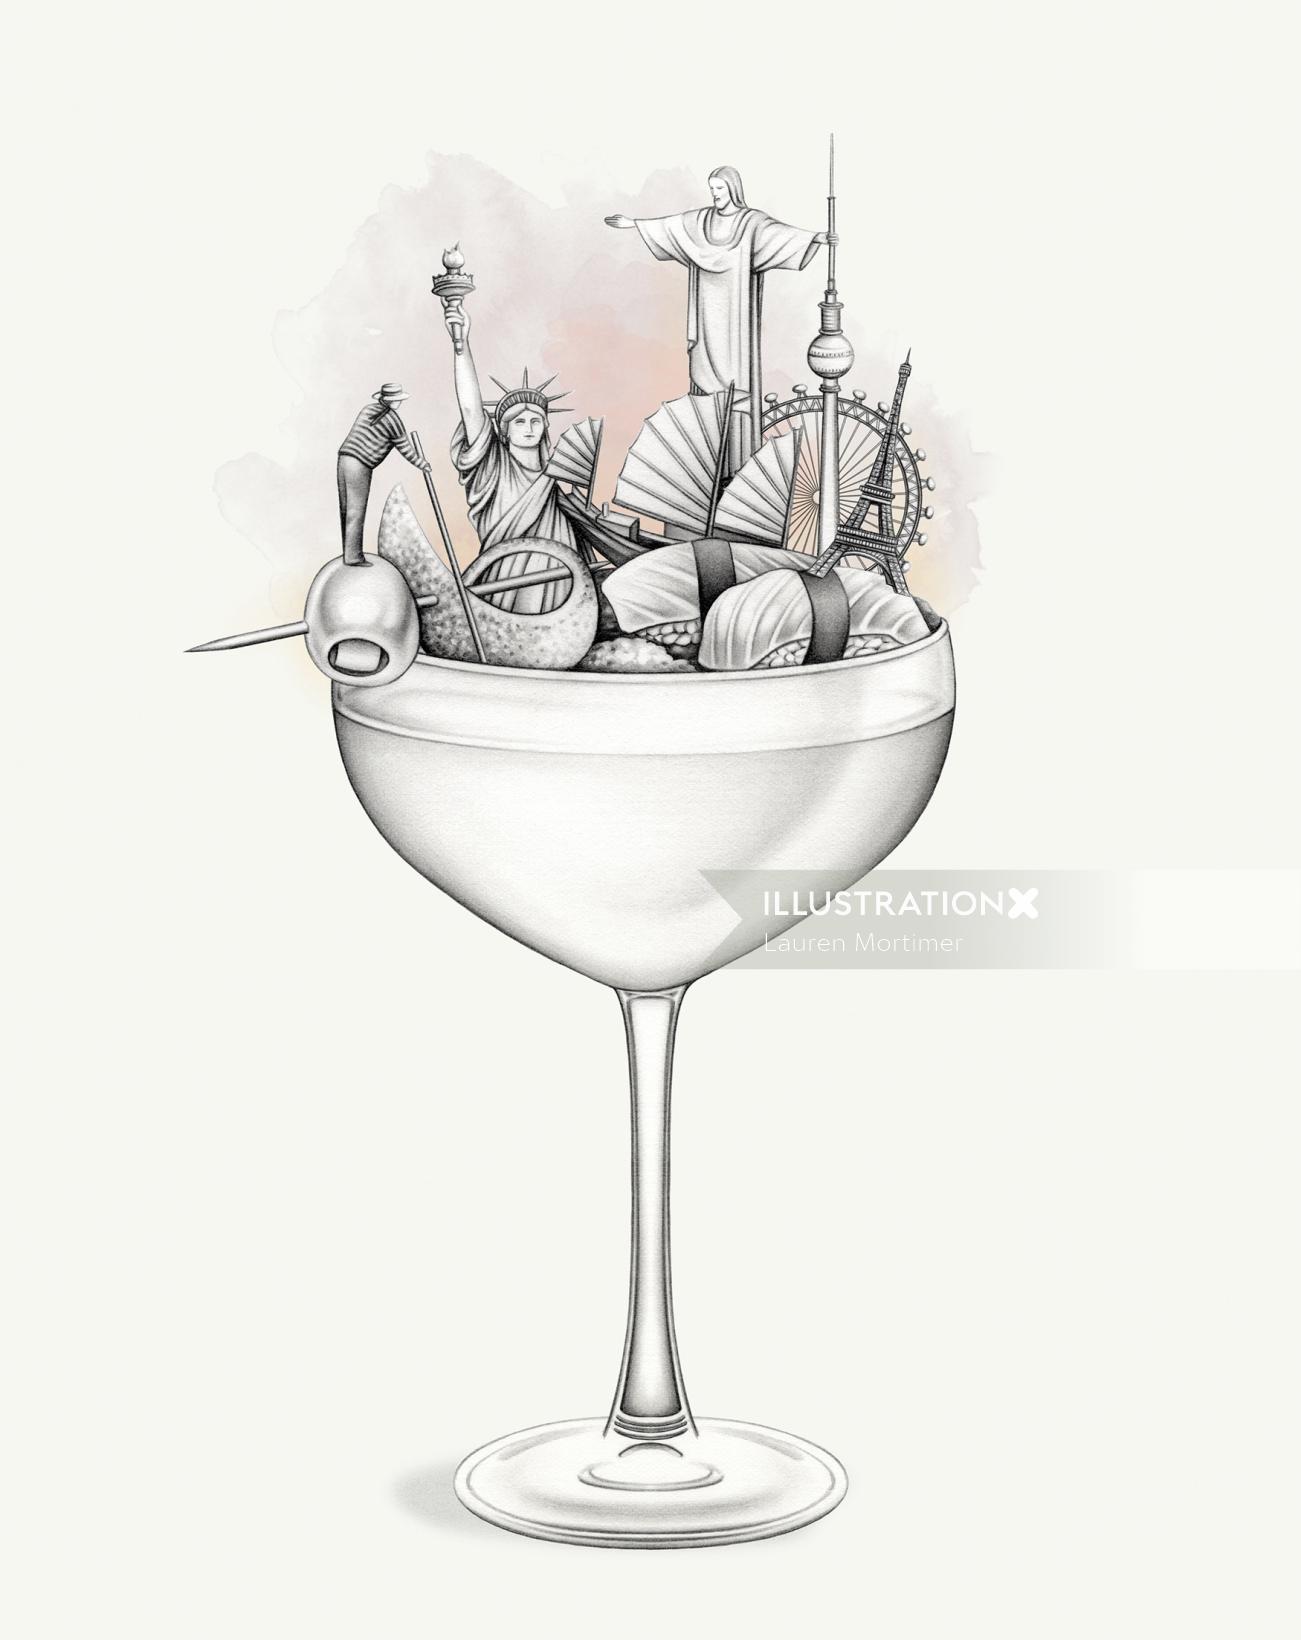 Editorial illustration of cocktails in 8 cities